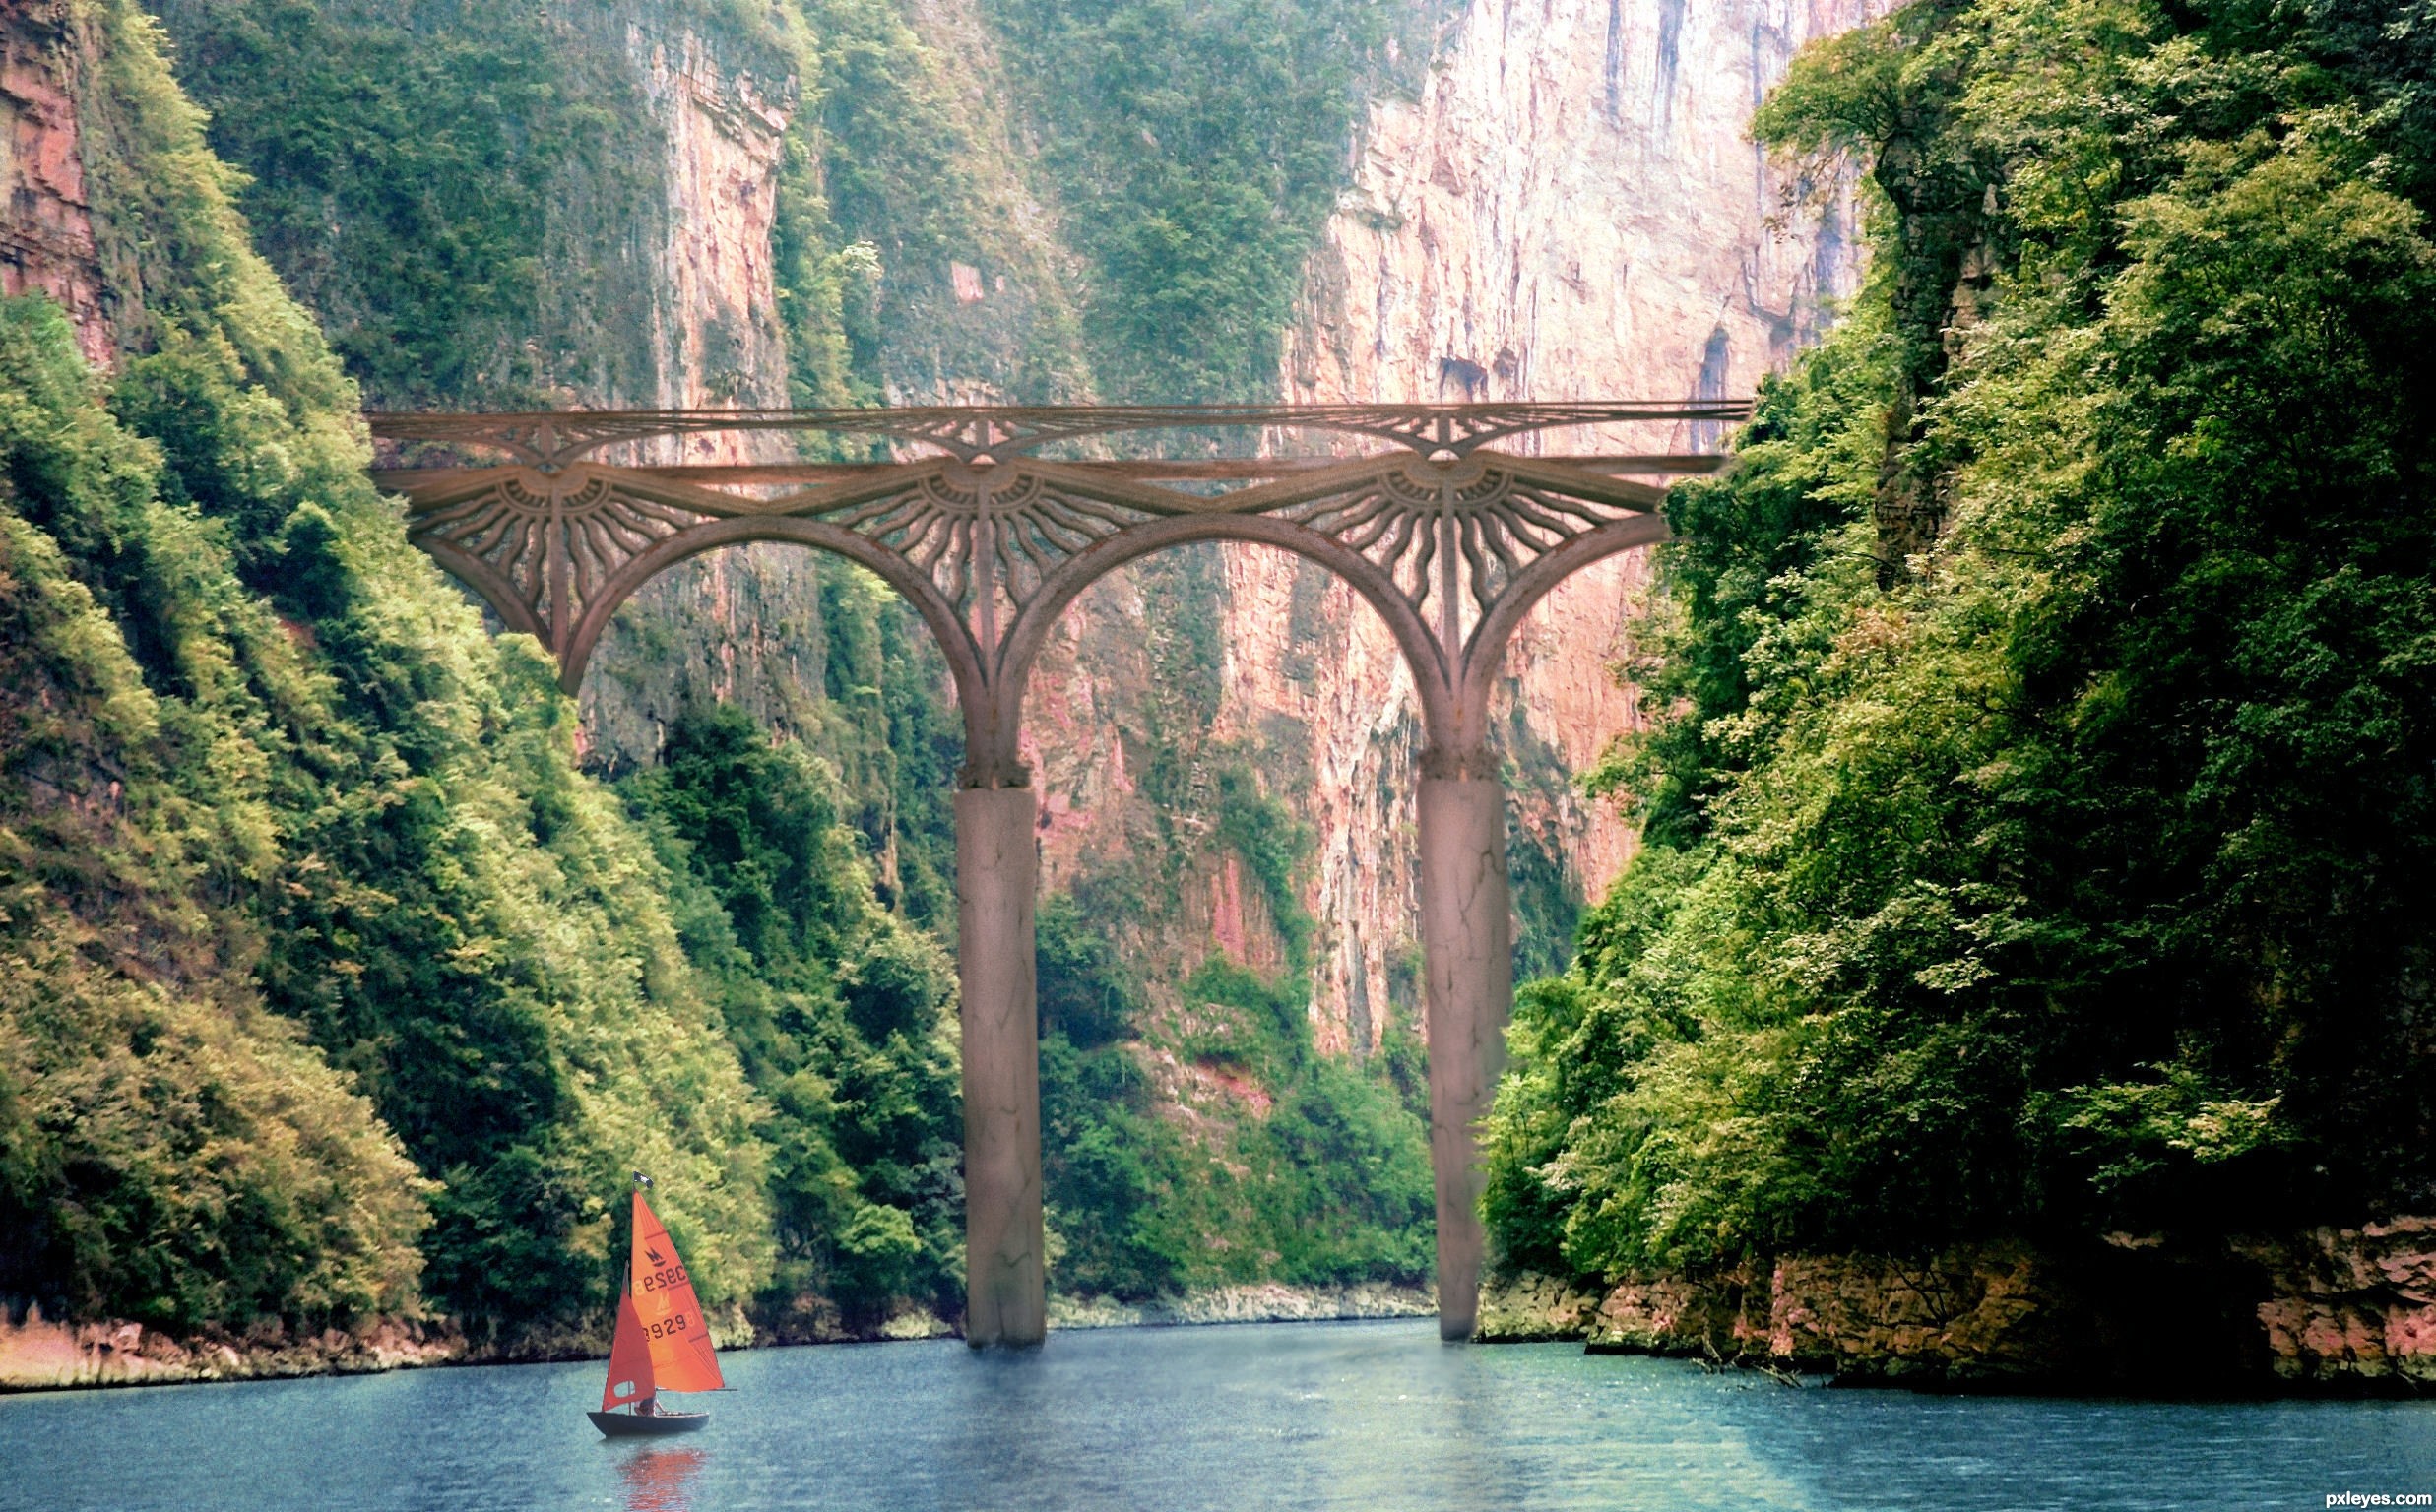 old bridge picture, by gornats for: cracked arch photoshop contest ...